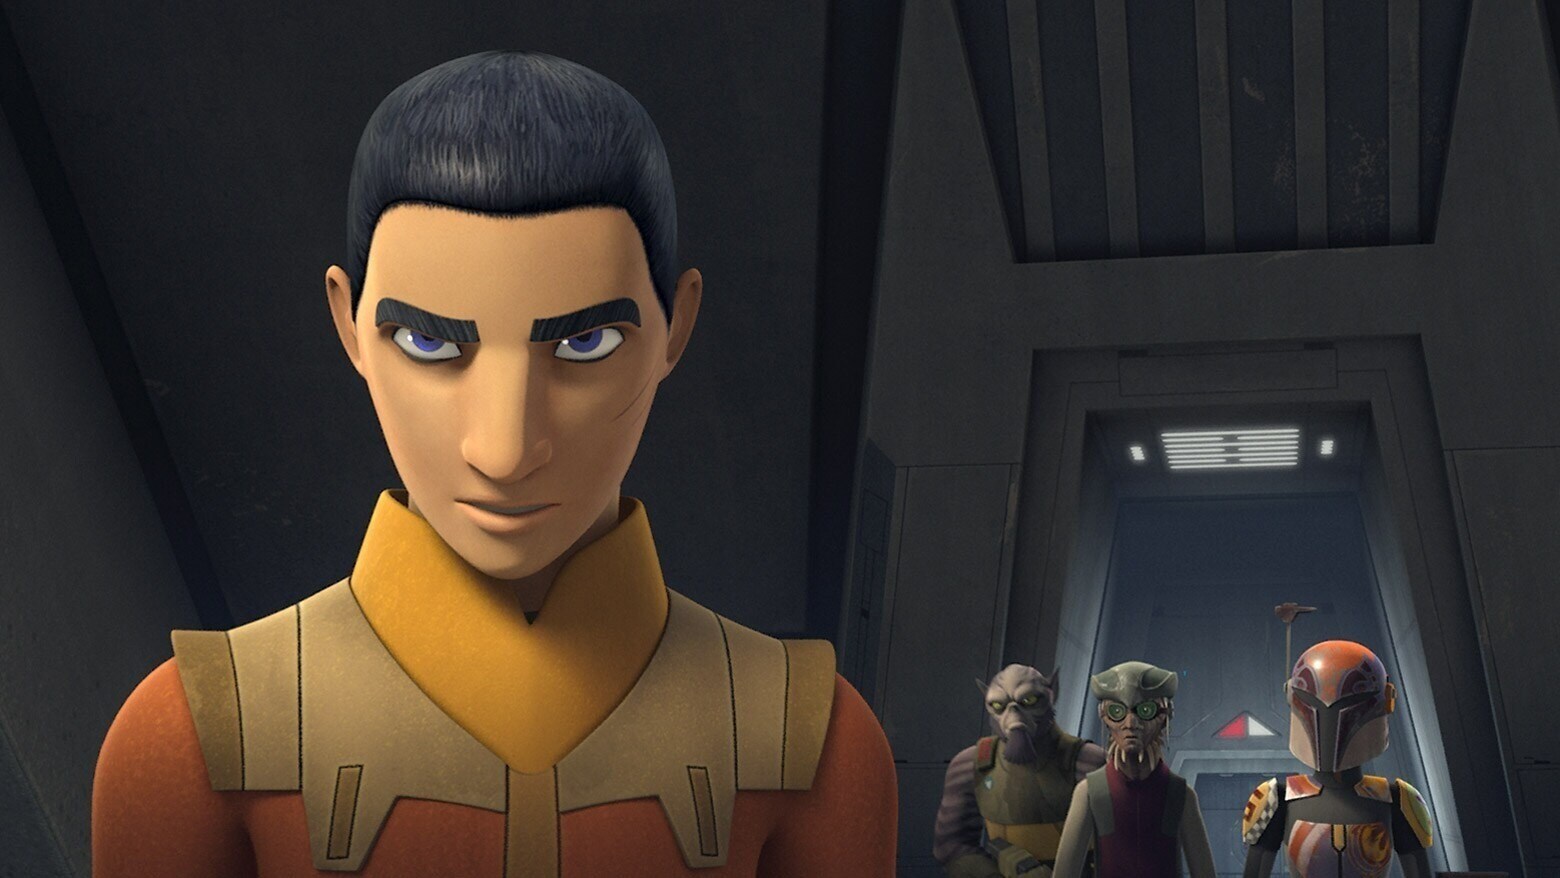 Ezra in the foreground, with Hondo and Zeb behind him